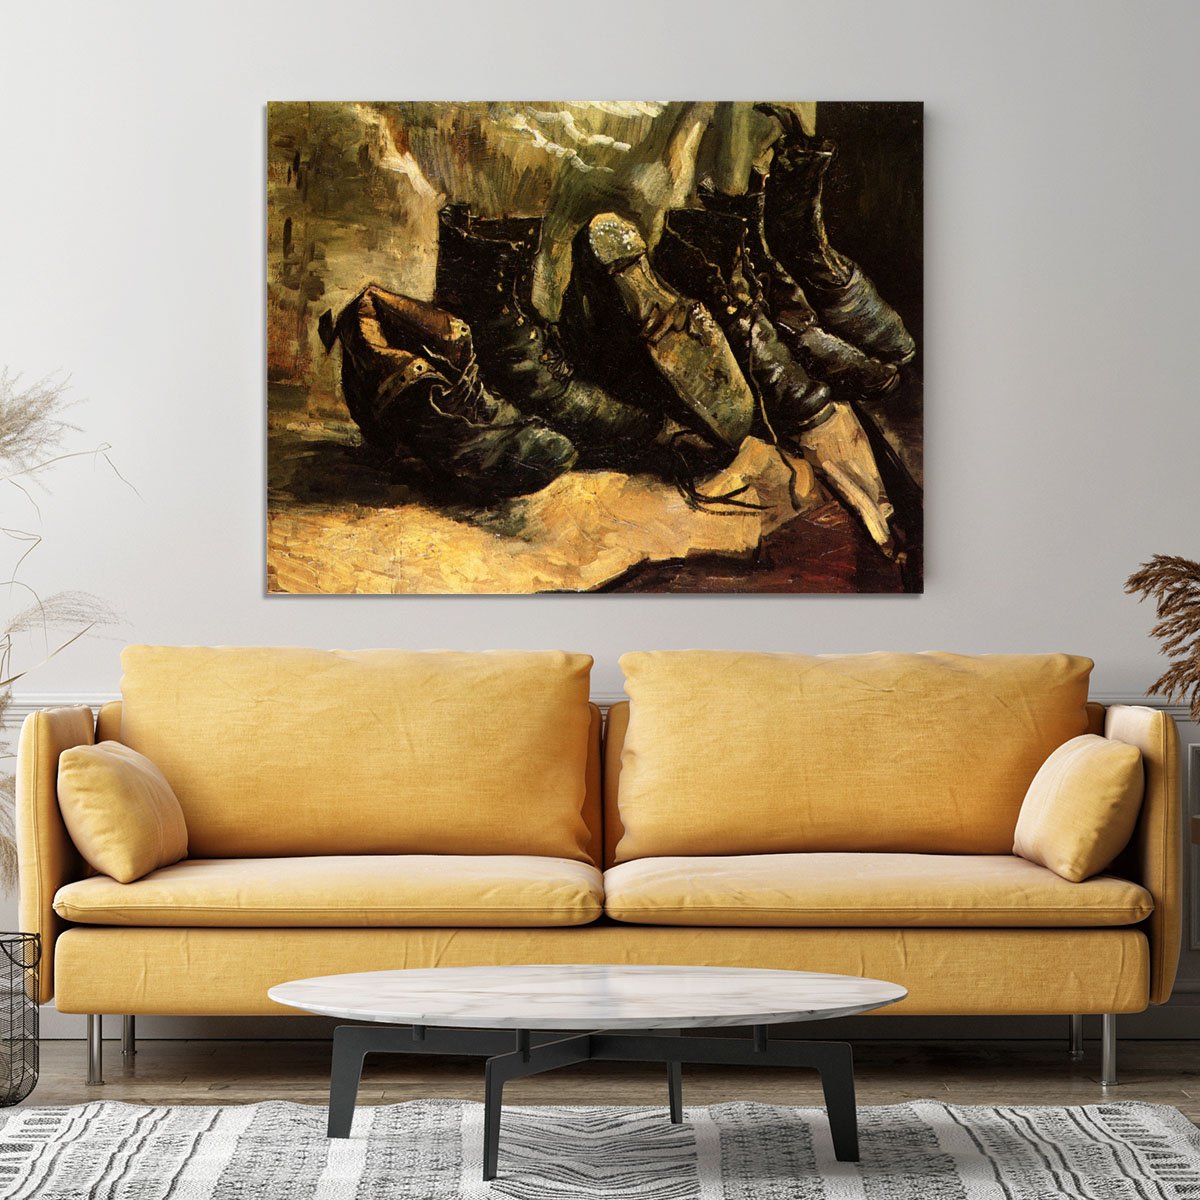 Three Pairs of Shoes by Van Gogh Canvas Print or Poster